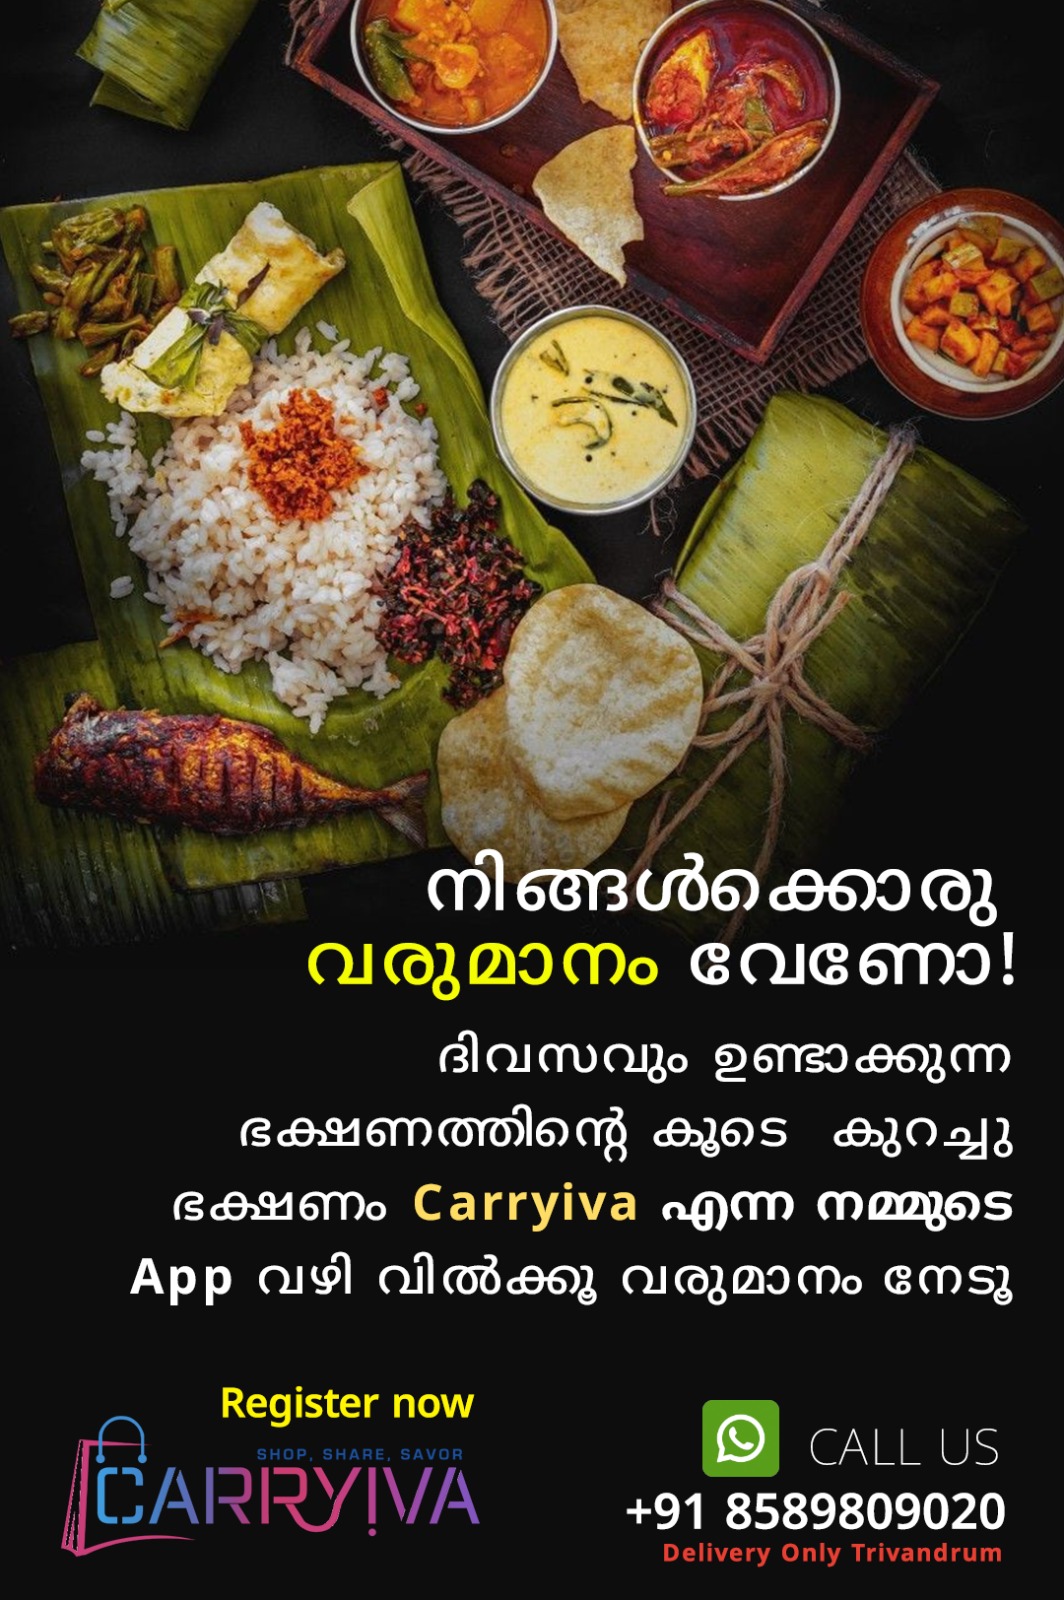 Carryiva Home Made Food delivery app in Trivandrum